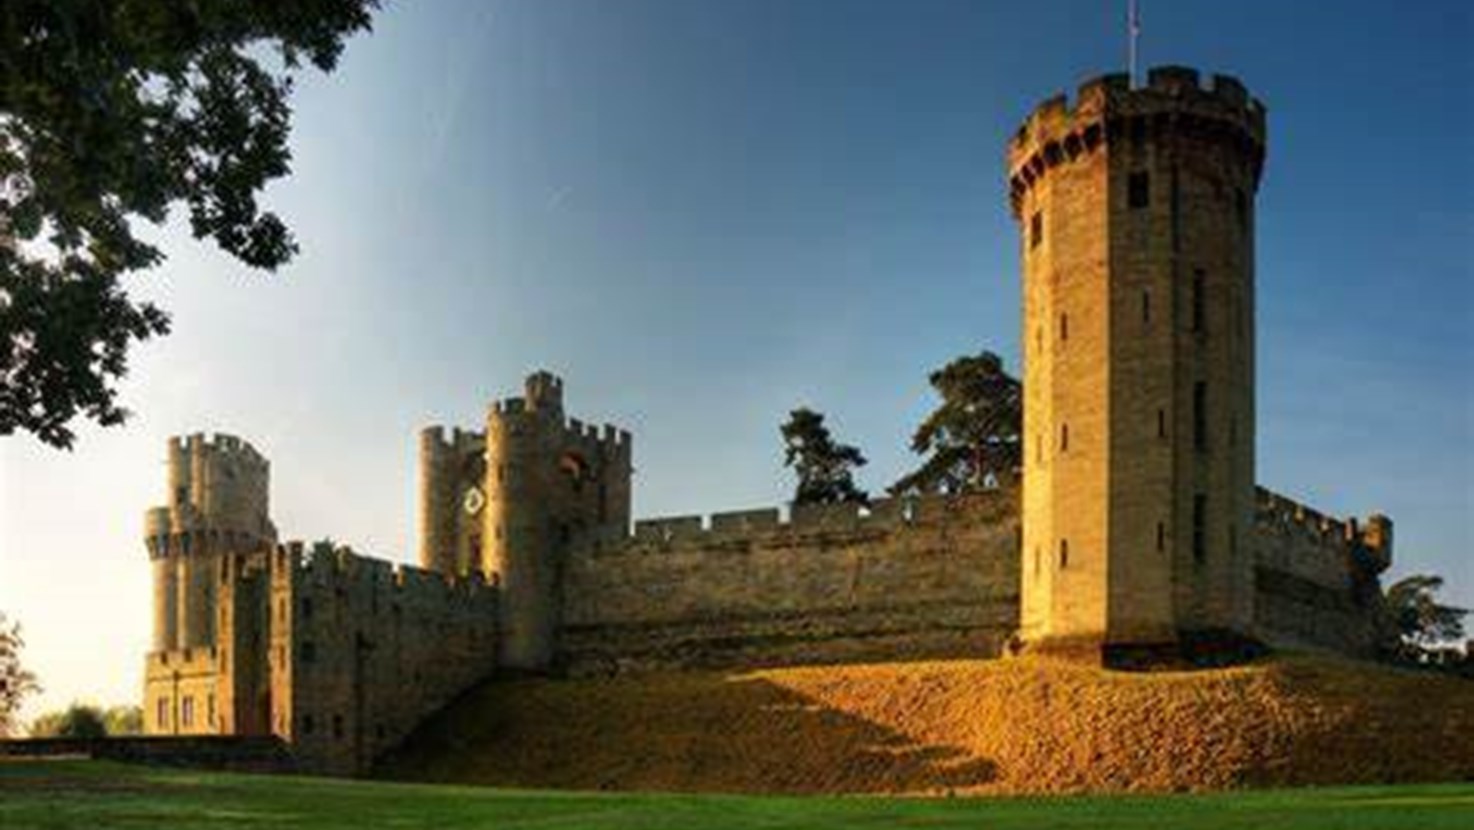 View all the events and meetings that PCC Marc Jones attended or hosted at Warwick Castle in 2023